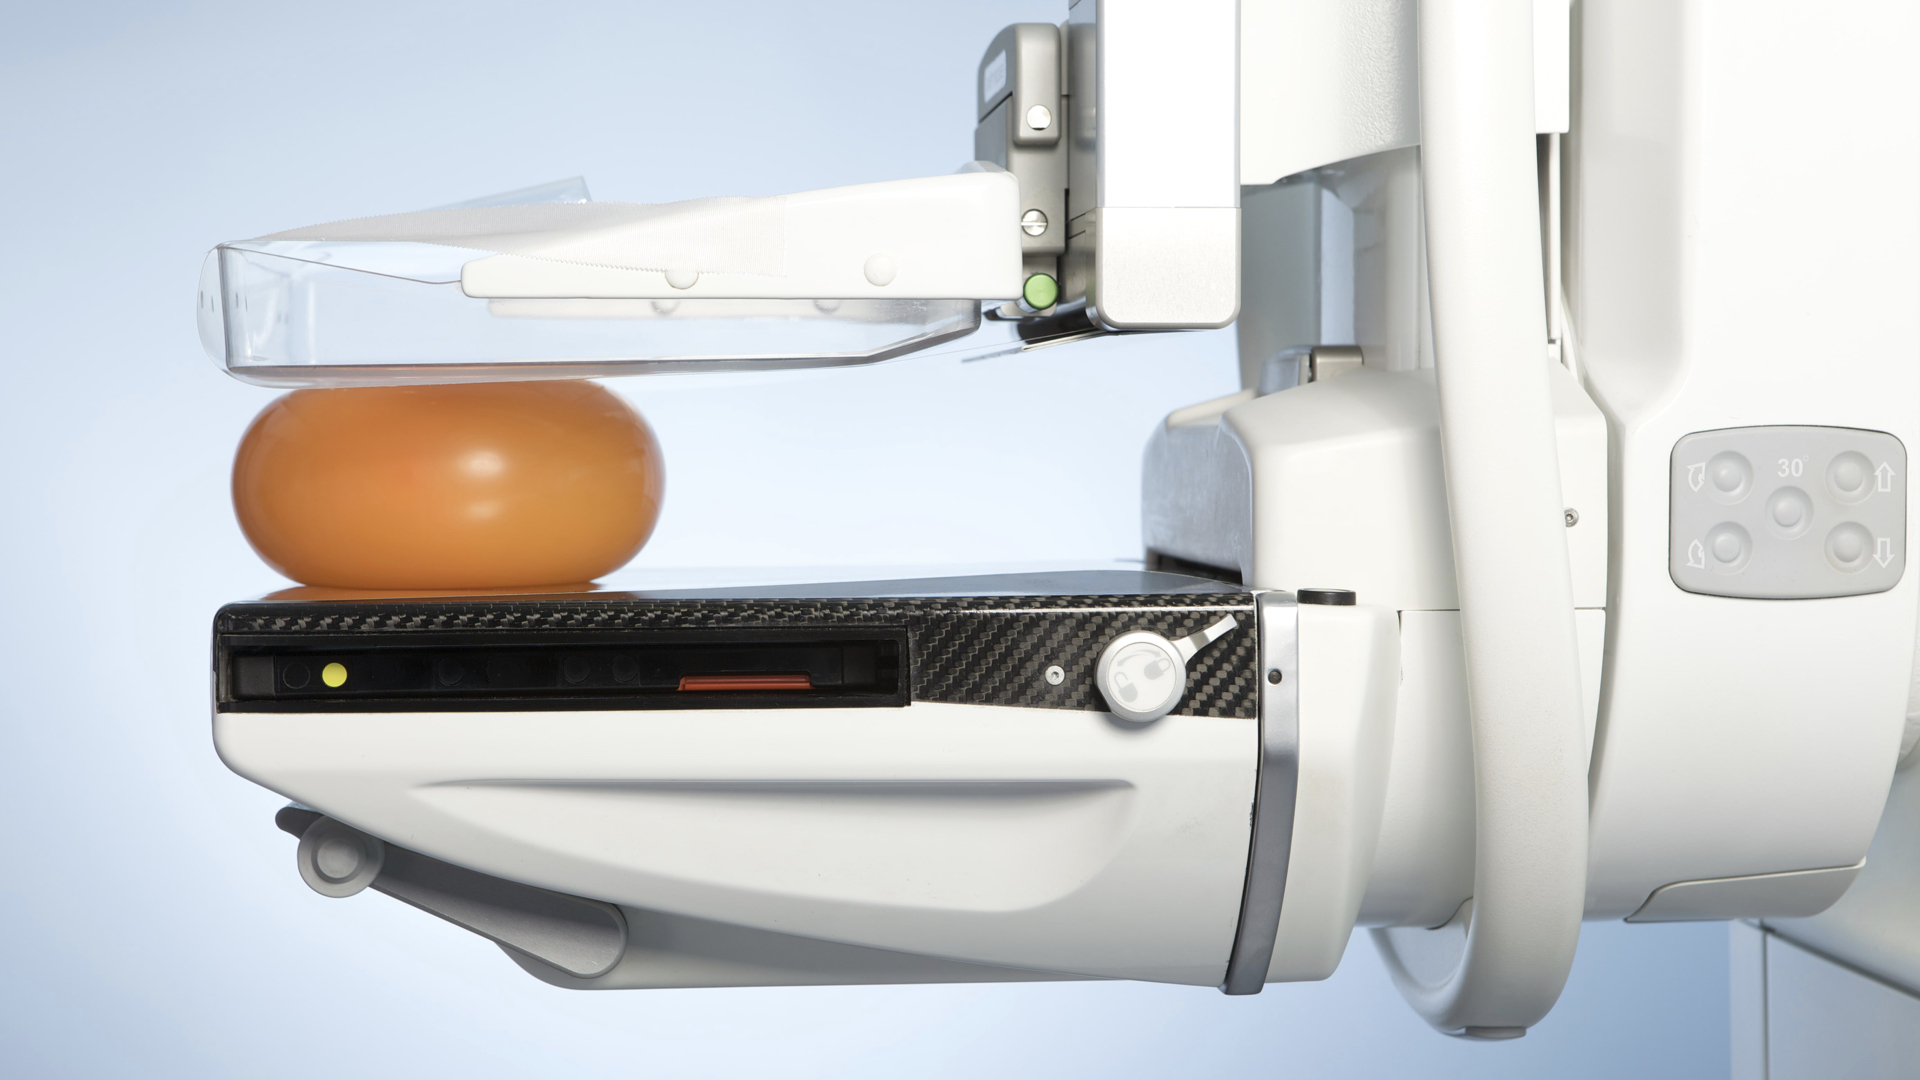 Less painful mammograms? New device may safely minimize the hurt